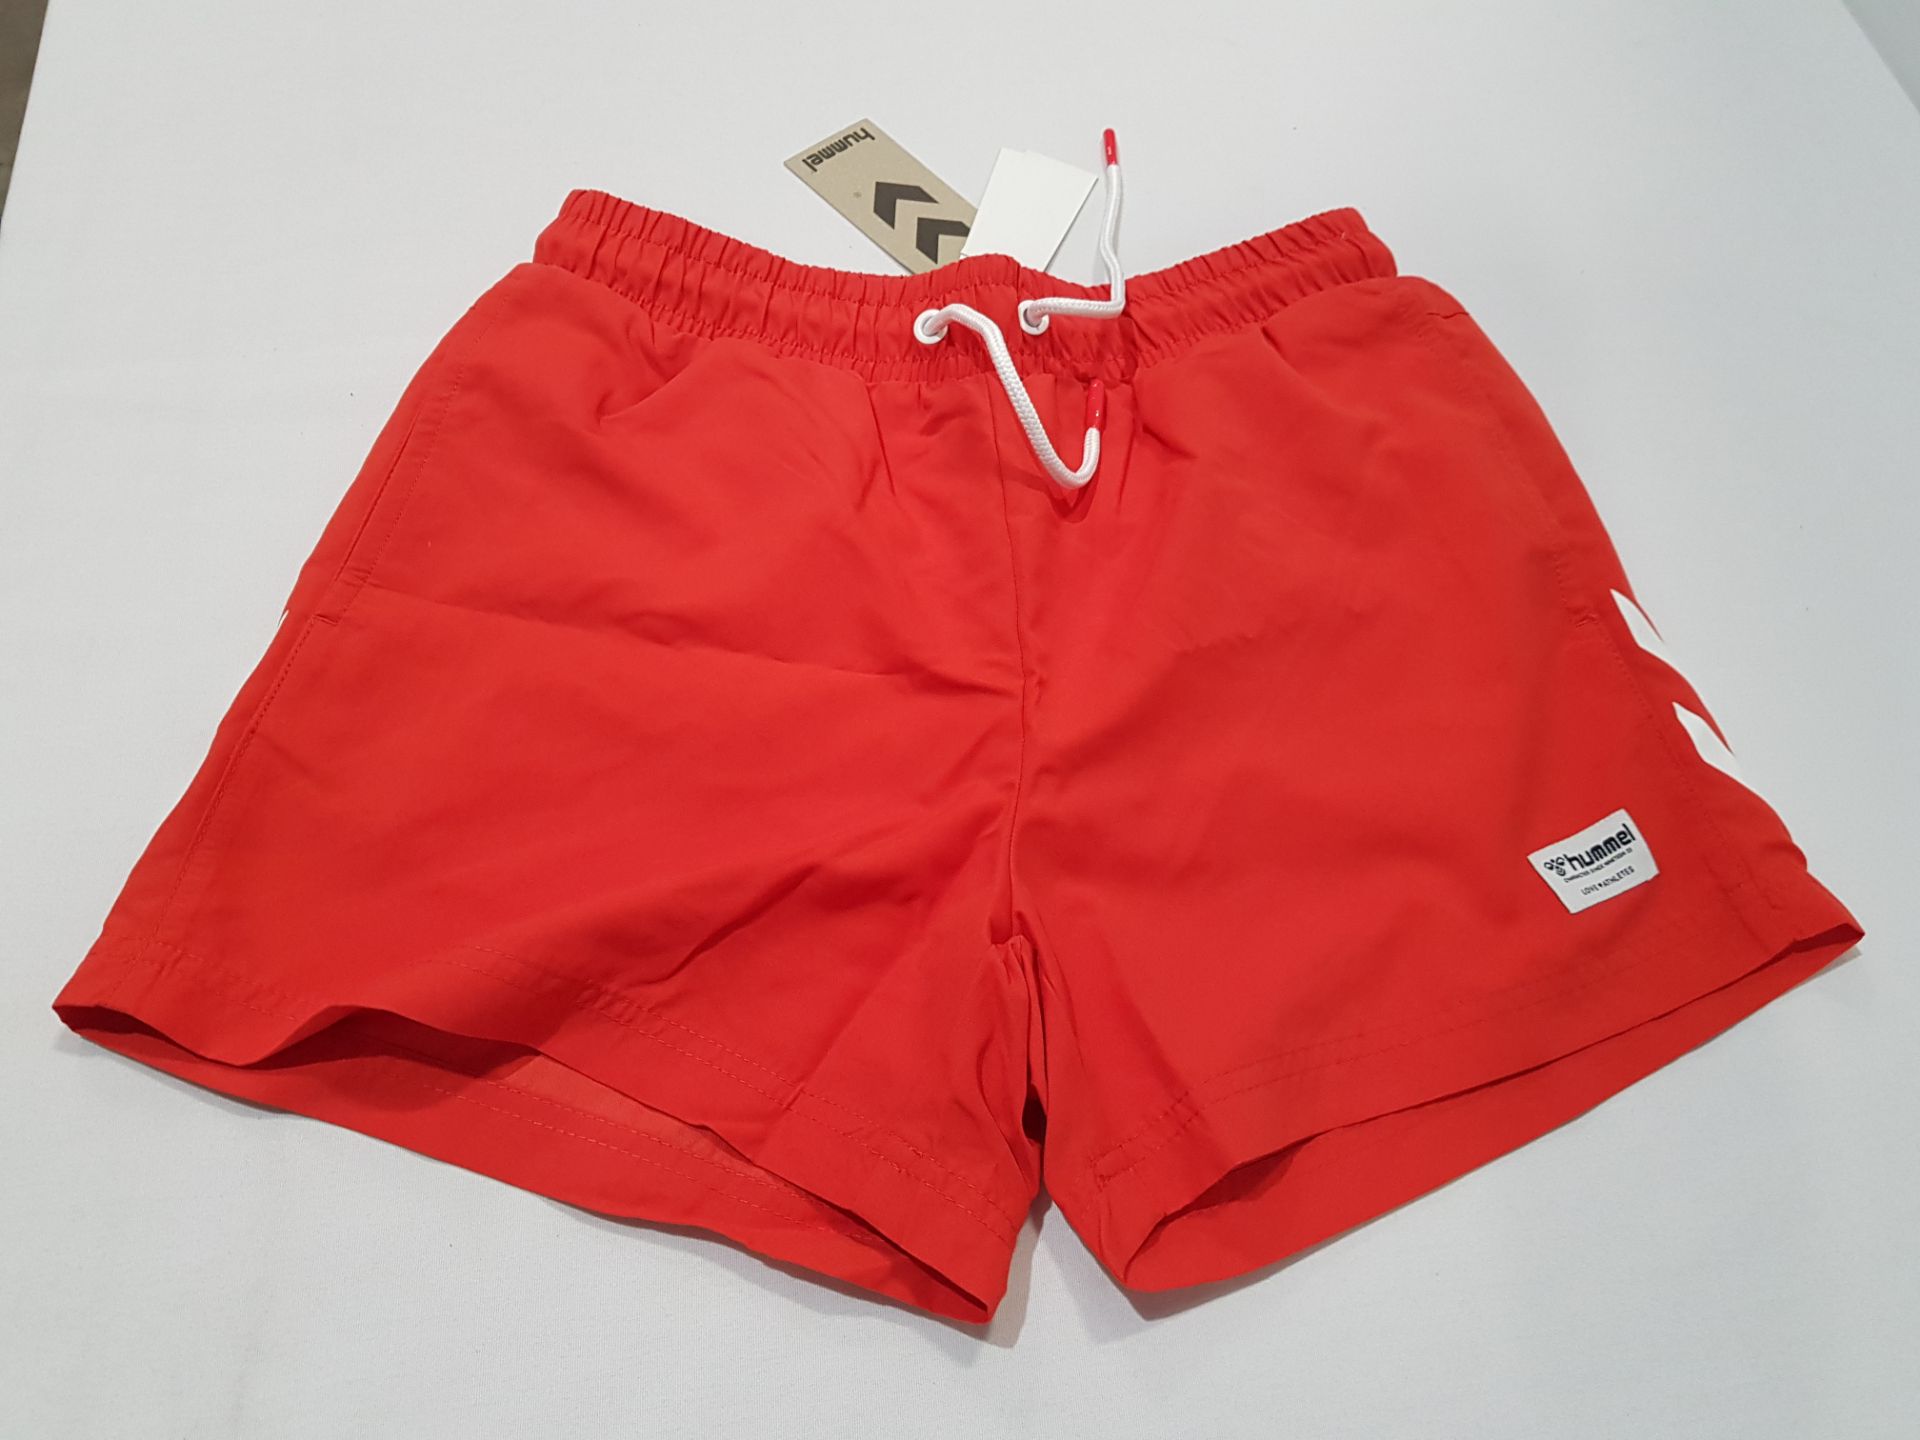 14 X BRAND NEW DESIGNER HUMMEL CLASSIC SWIM TRUNKS IN RED IN MIXED SIZES MENS( RRP £26 EACH-